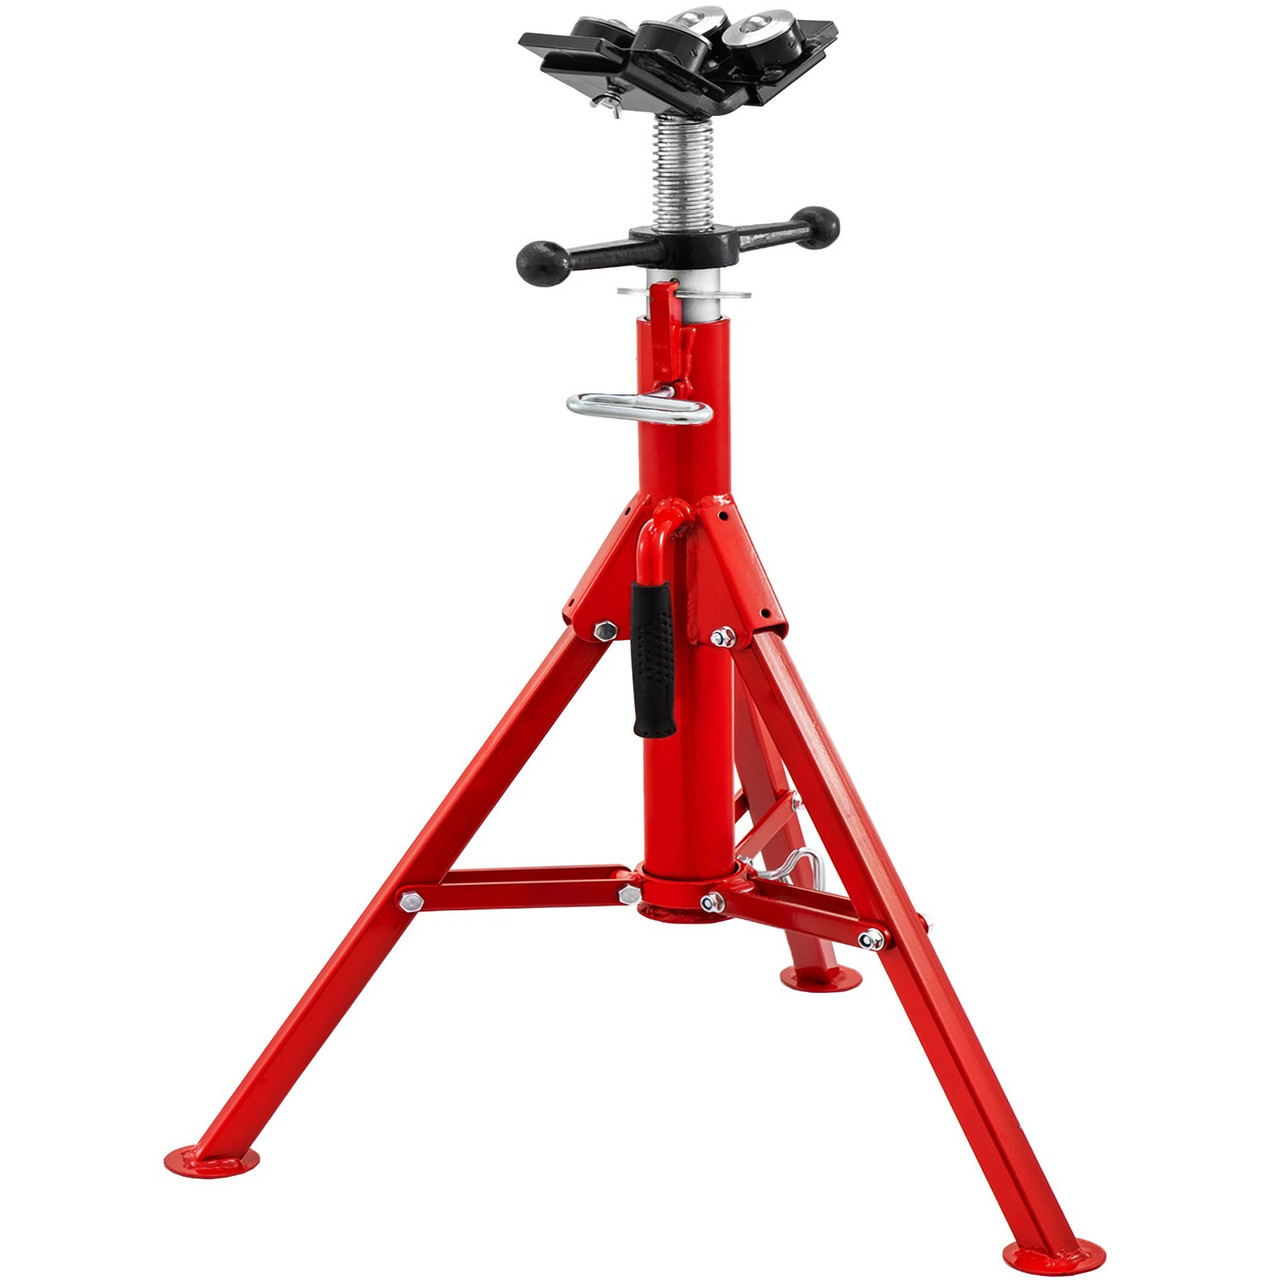 Pipe Jack Stand with 4-Ball Transfer V-Head and Folding Legs 1500LB Welding Pipe Stand Adjustable Height 28-52IN 1107A-type Pipe Jacks for Welding